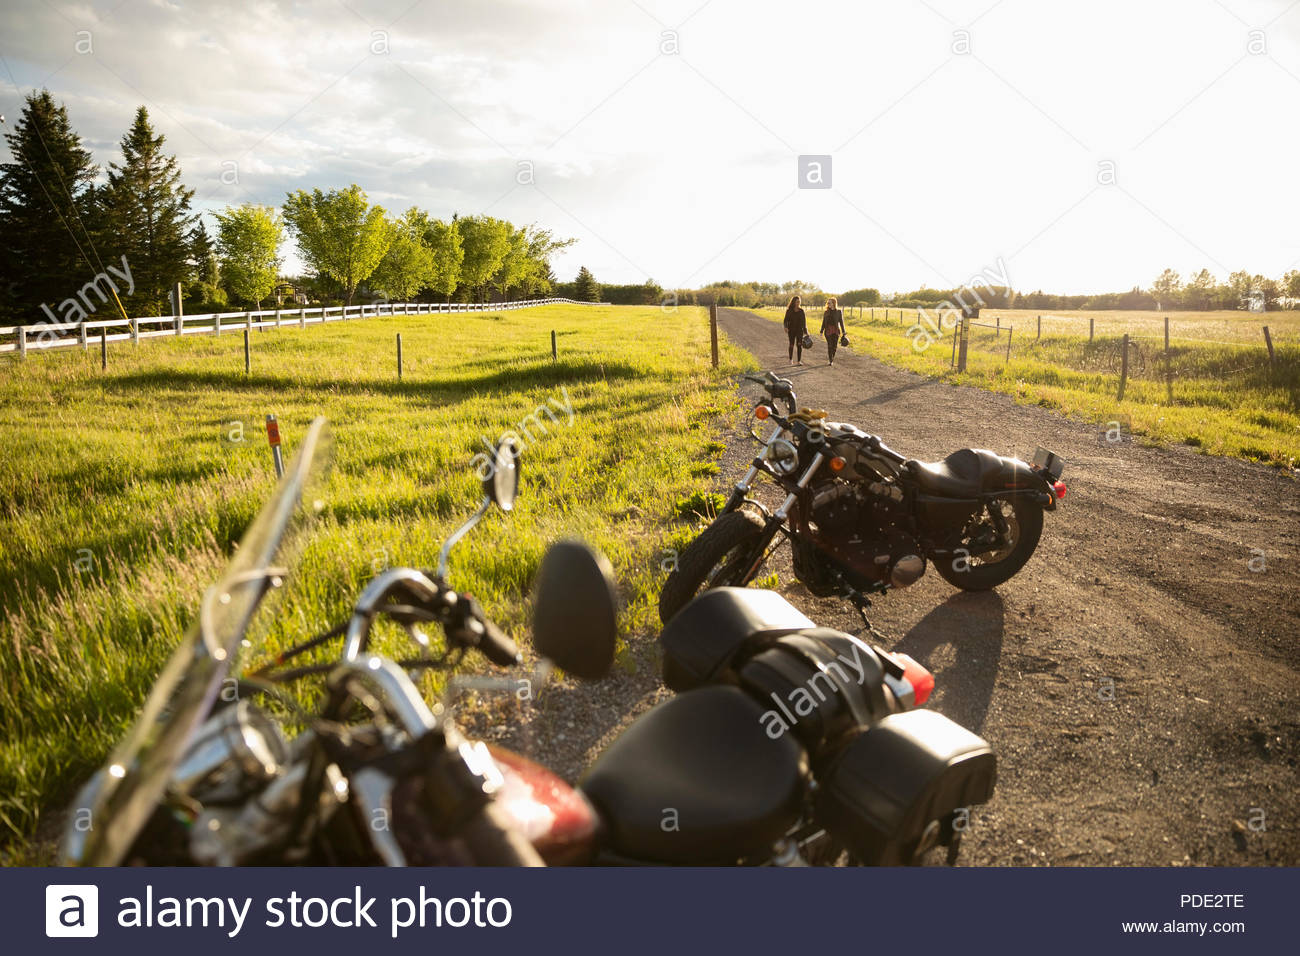 Women friends walking away from motorcycles on sunny rural road Stock Photo